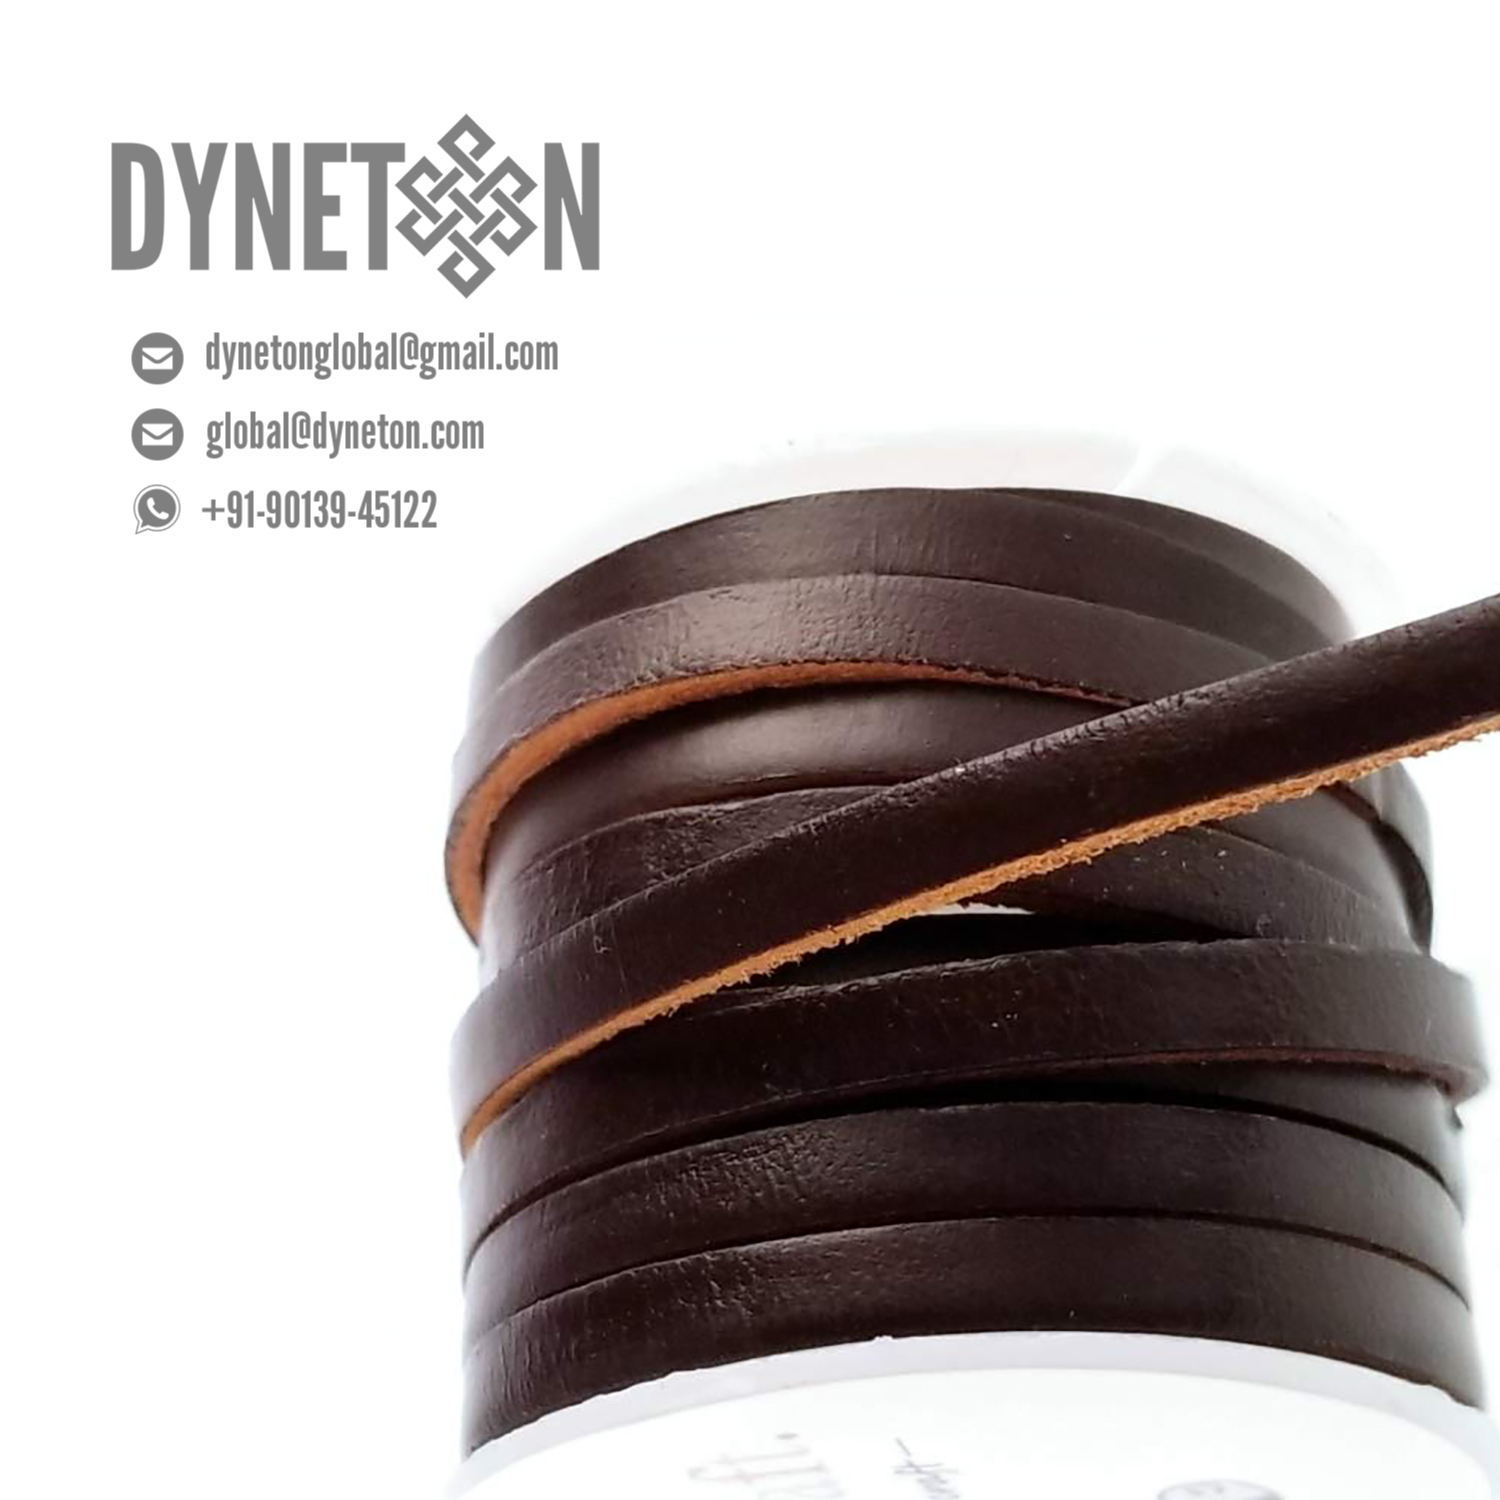 7mm Flat Leather Cord - DYNETON / Flat Leather Cords 7 mm